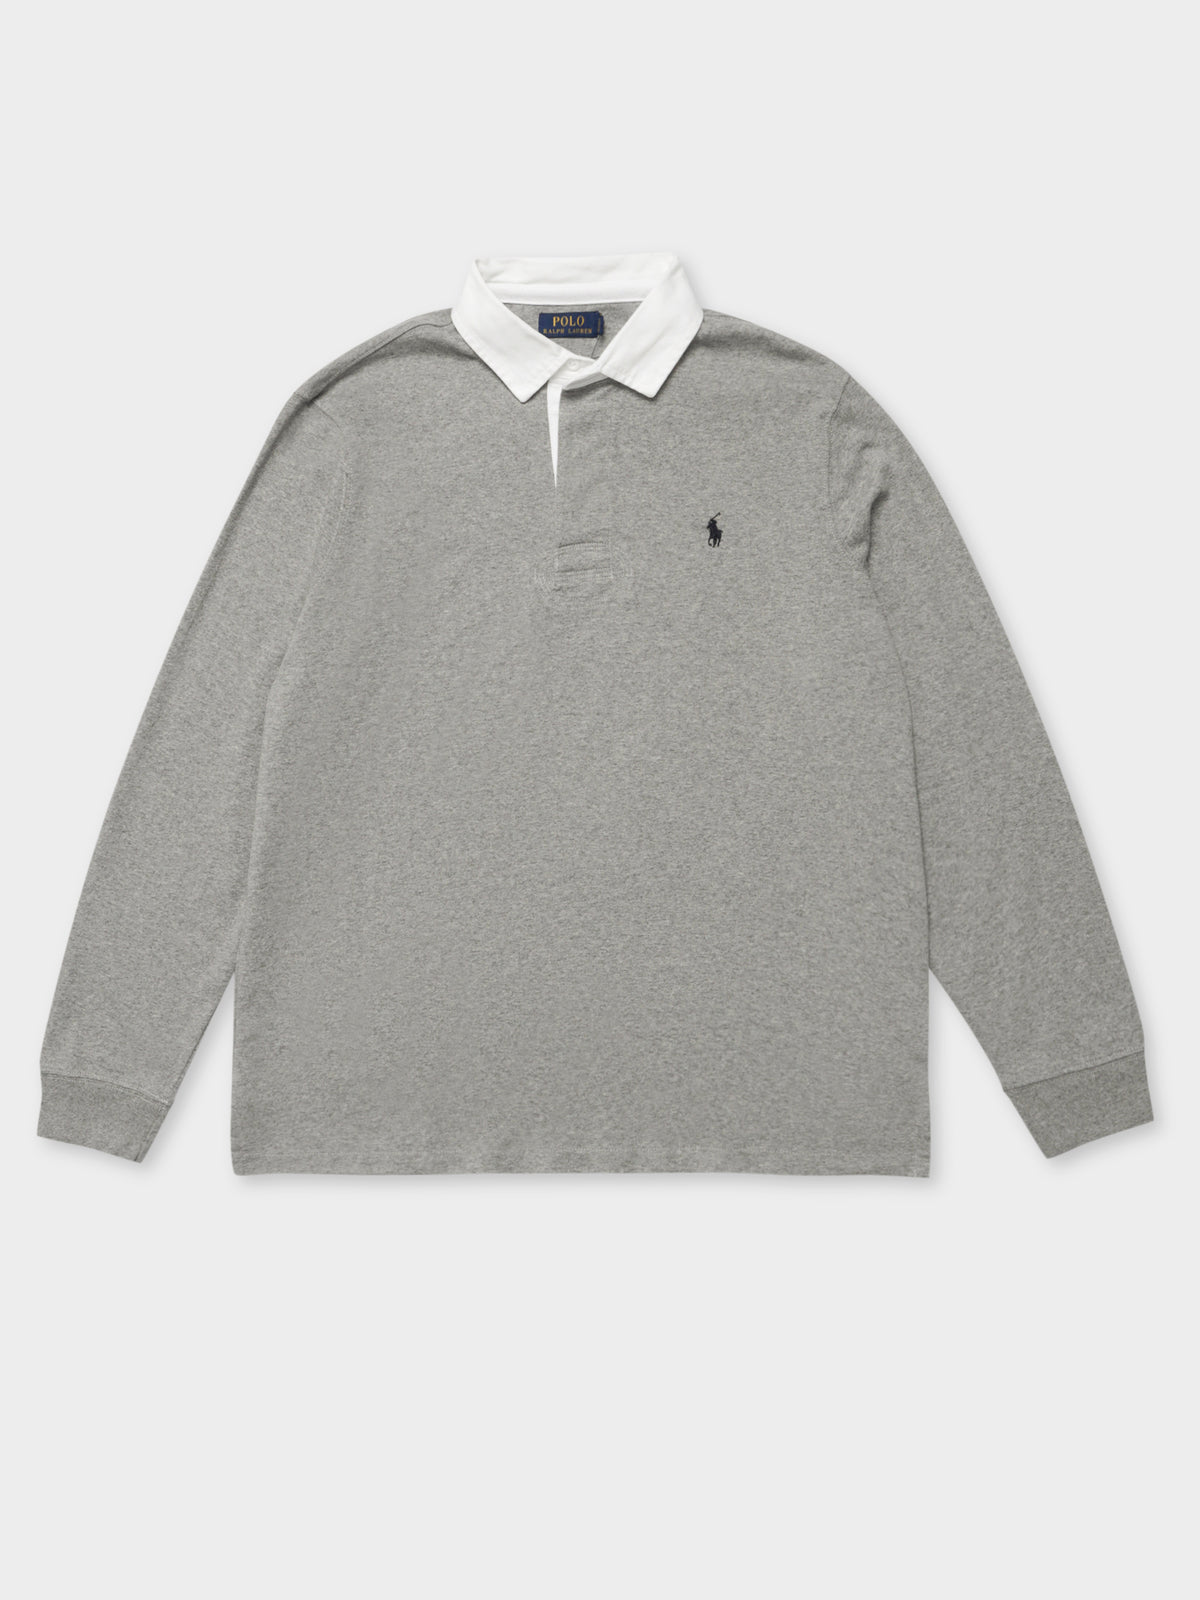 Long Sleeve Rugby Shirt in Grey